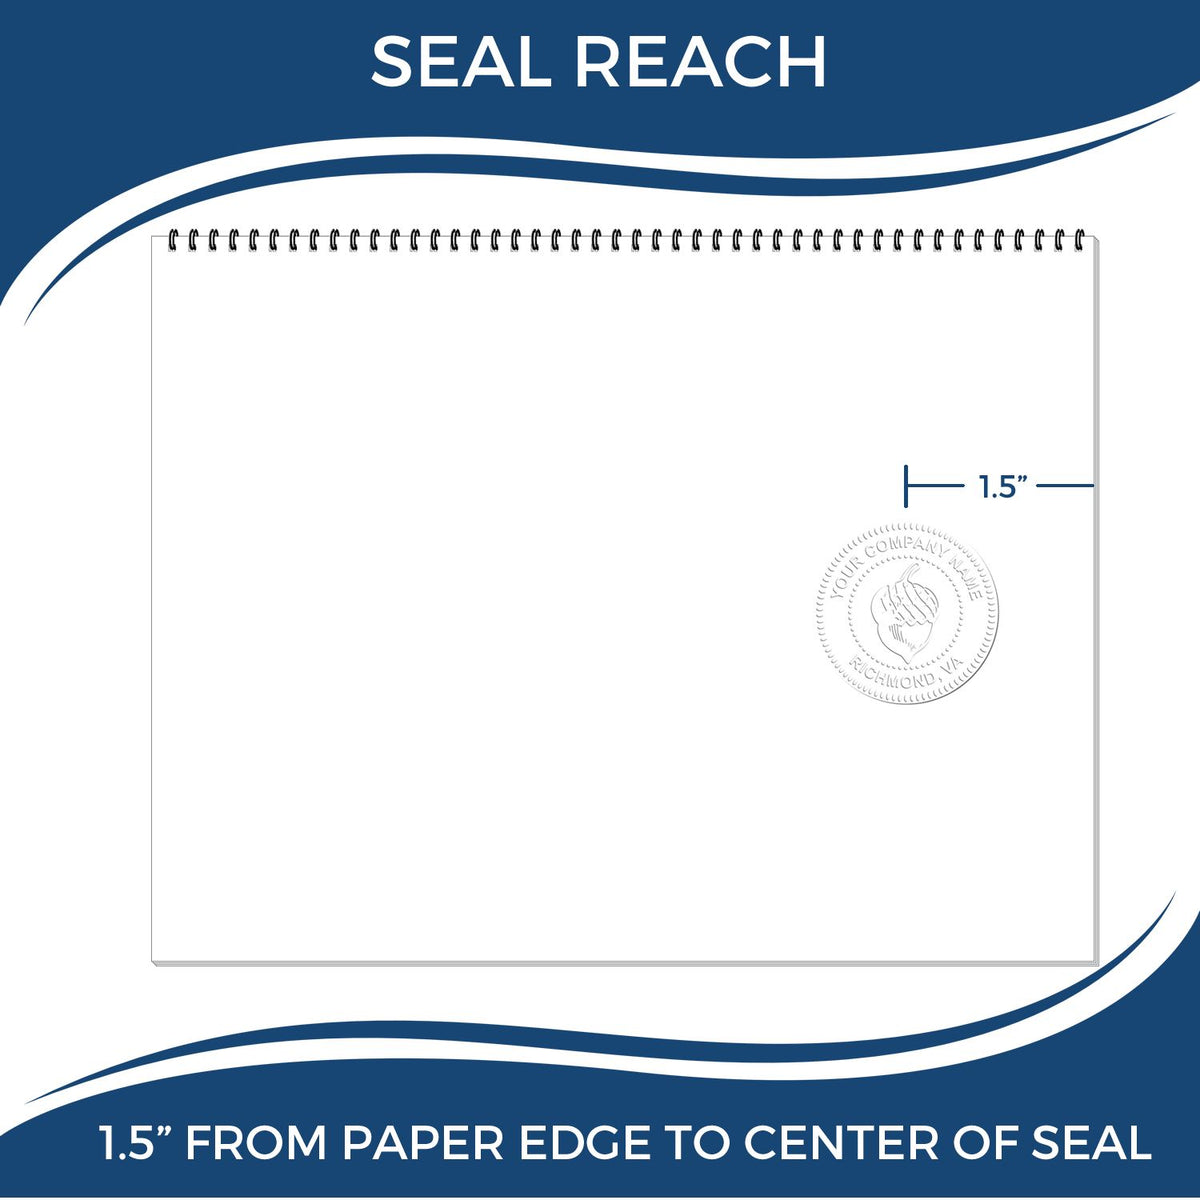 An infographic showing the seal reach which is represented by a ruler and a miniature seal image of the State of Pennsylvania Soft Land Surveyor Embossing Seal